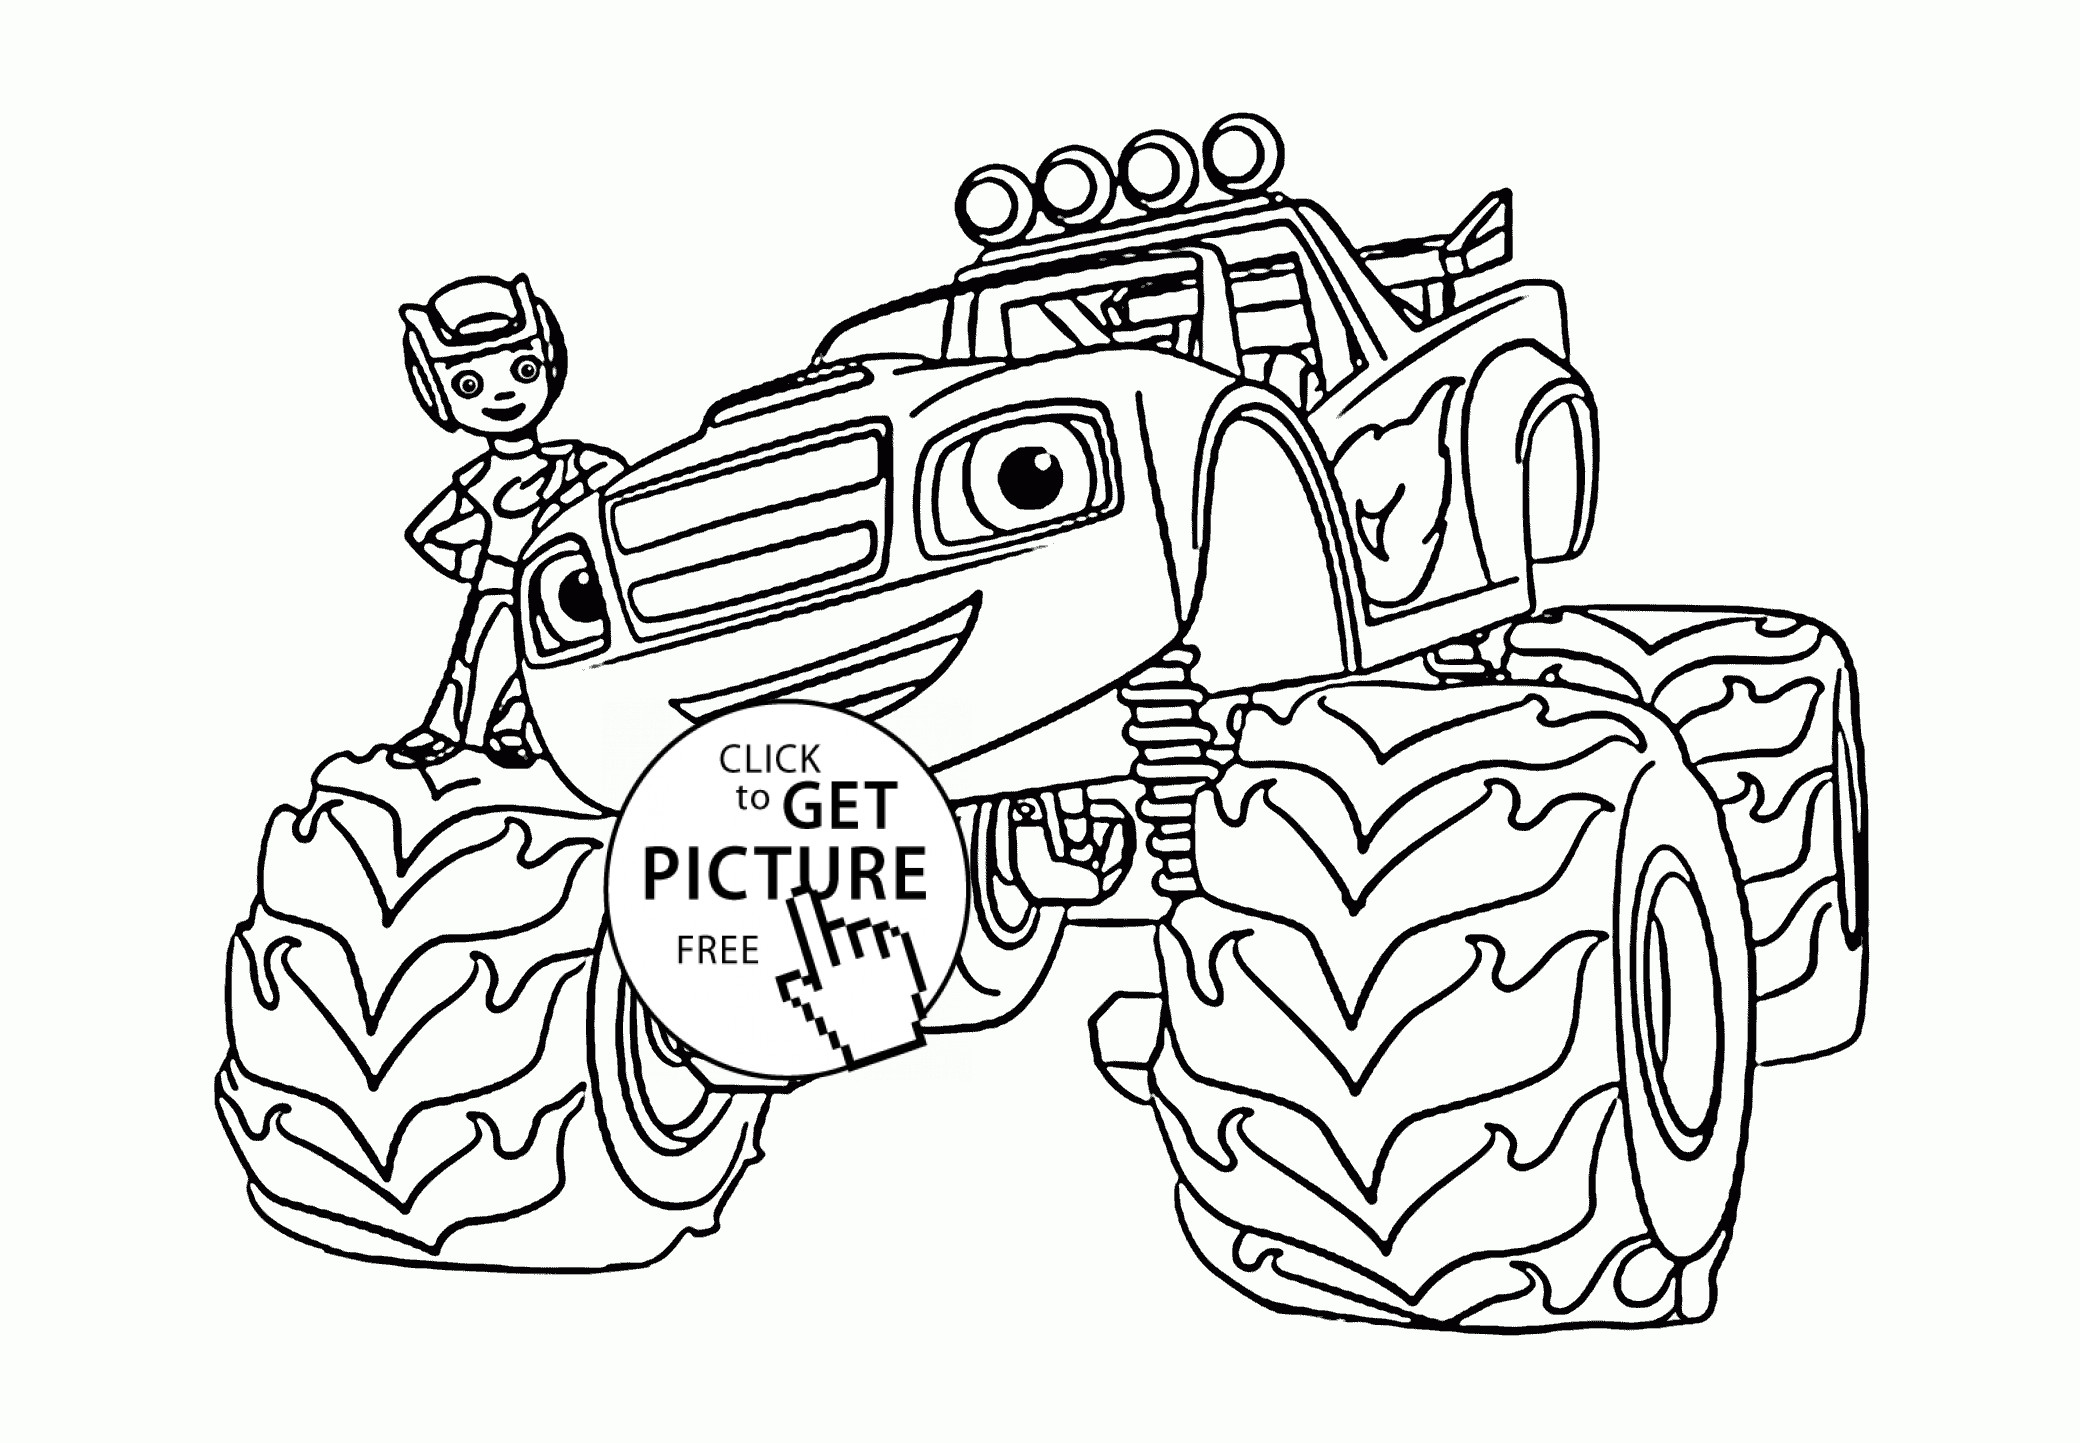 Coloring Pages Printable For Boys
 Blaze Monster Truck with Boy coloring page for kids